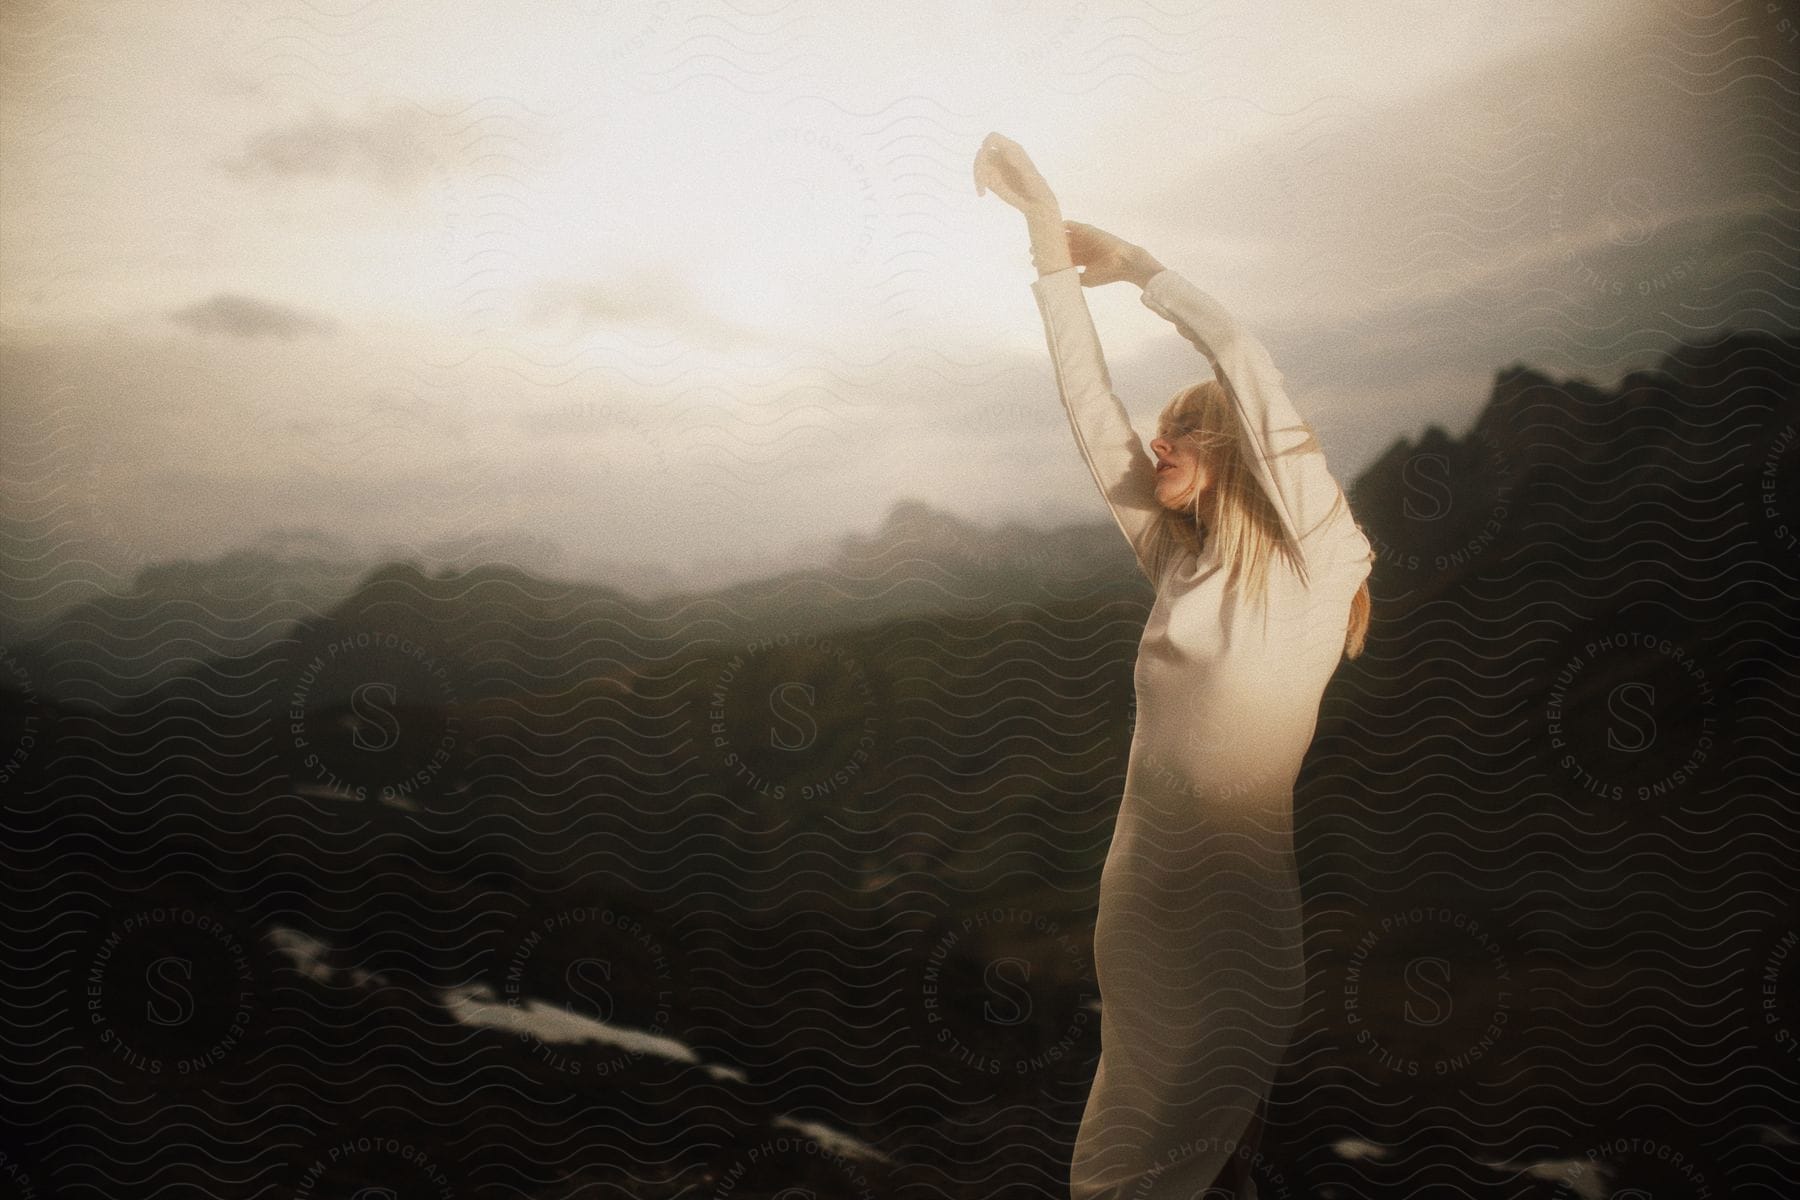 A woman stretches her arms in front of a mountain range and river